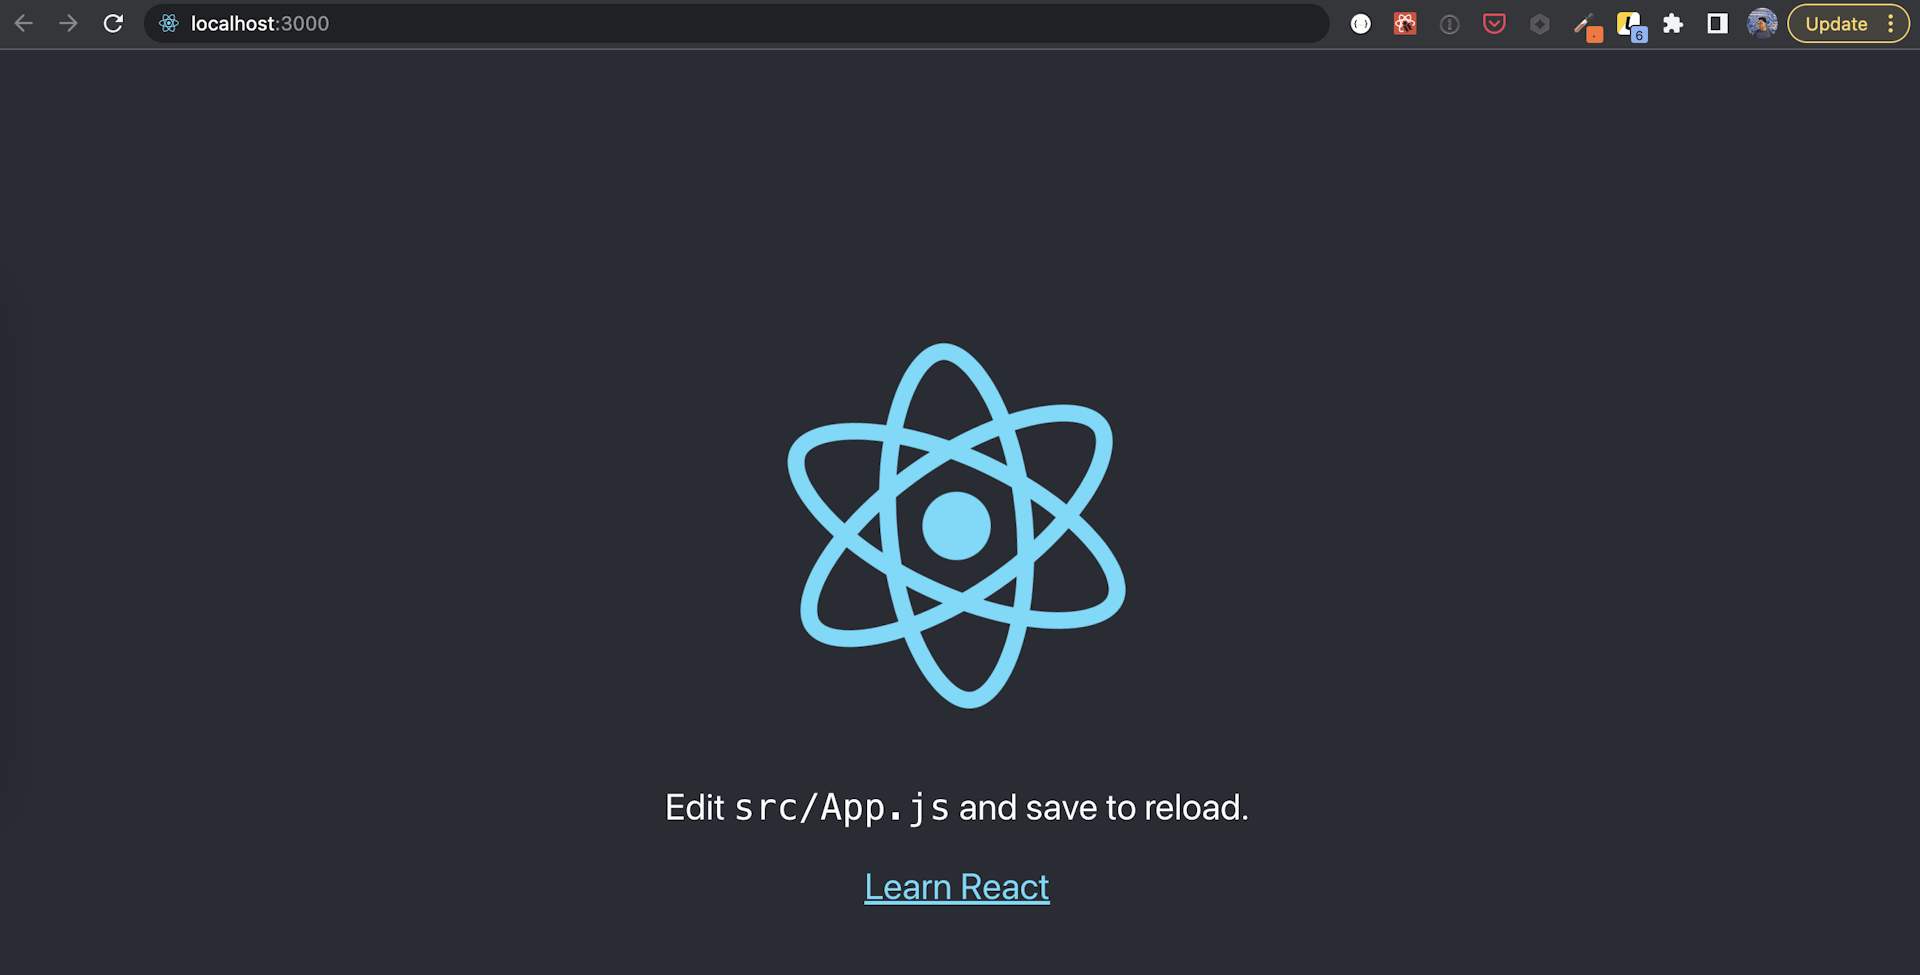 The default landing page for a new React project